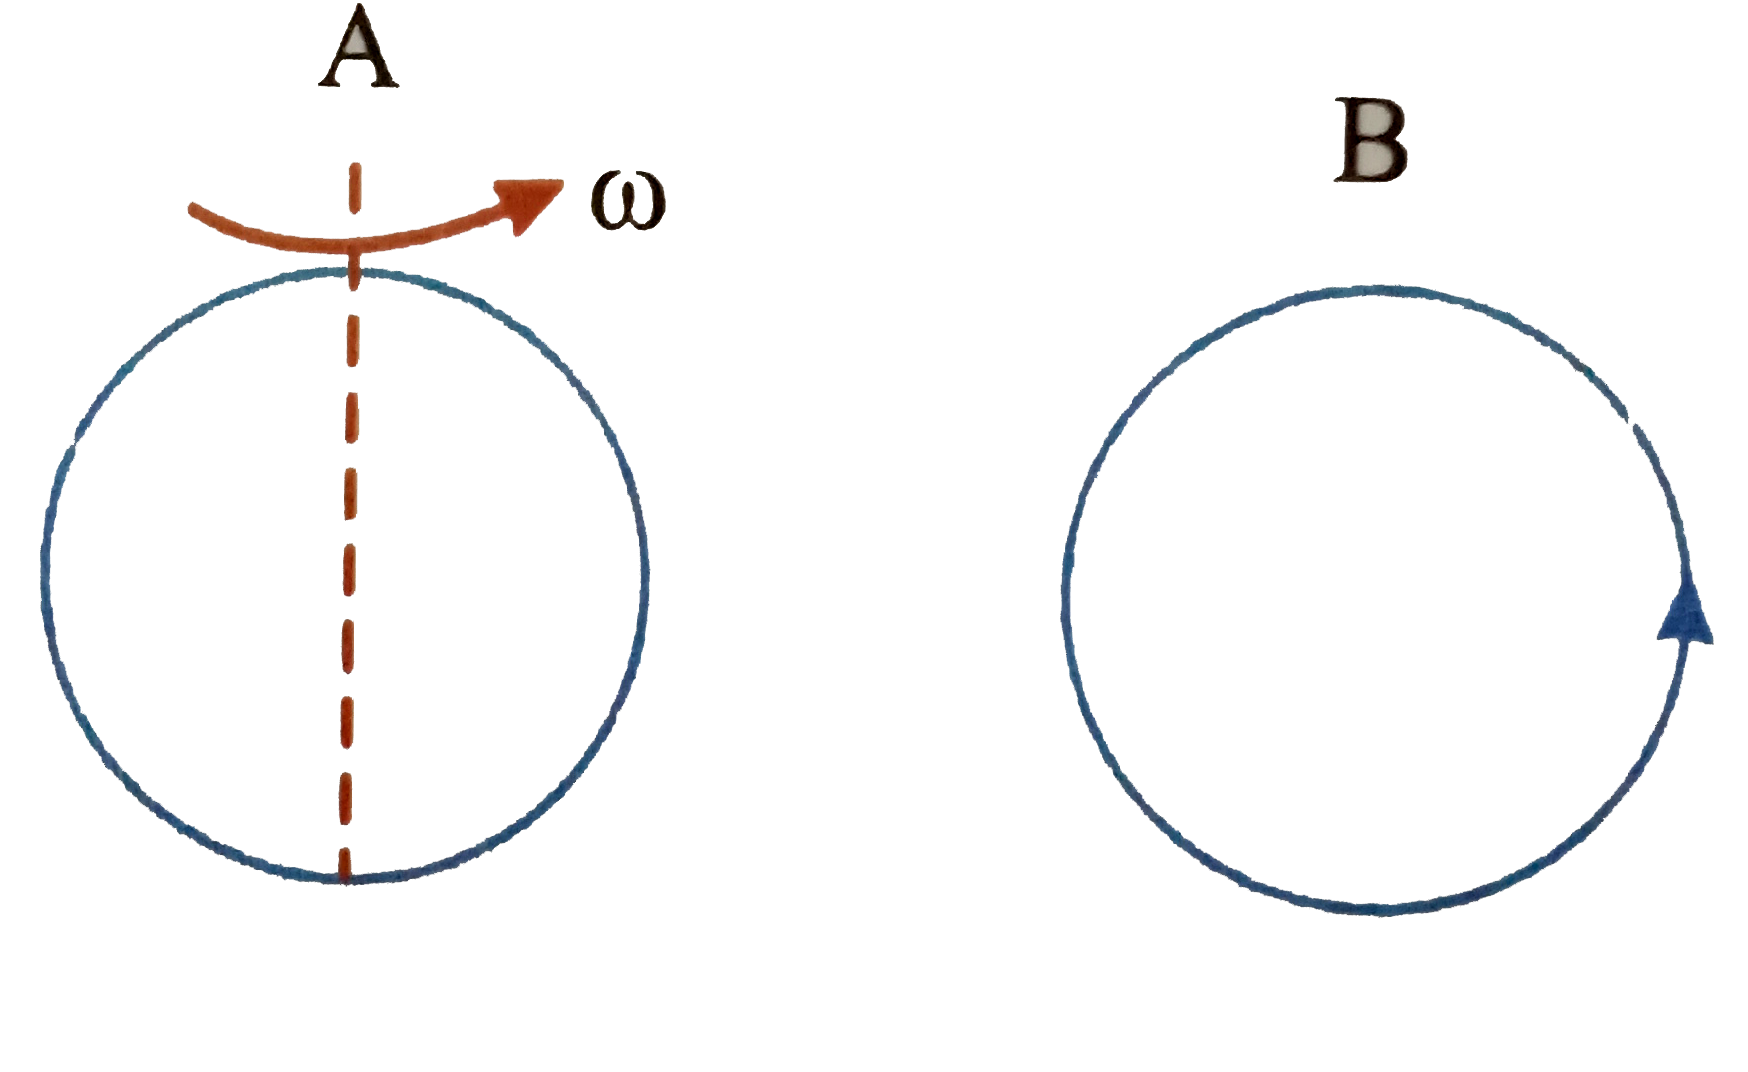 Same as problem 4 except the coil A is made to rotate about a vertical axis in the plane of the coil (Figure). No currents flows in B if A is at rest. The current in coil A, when the current in B (at t = 0) is counterclockwise and the coil A is as shown at this instant, t = 0, is